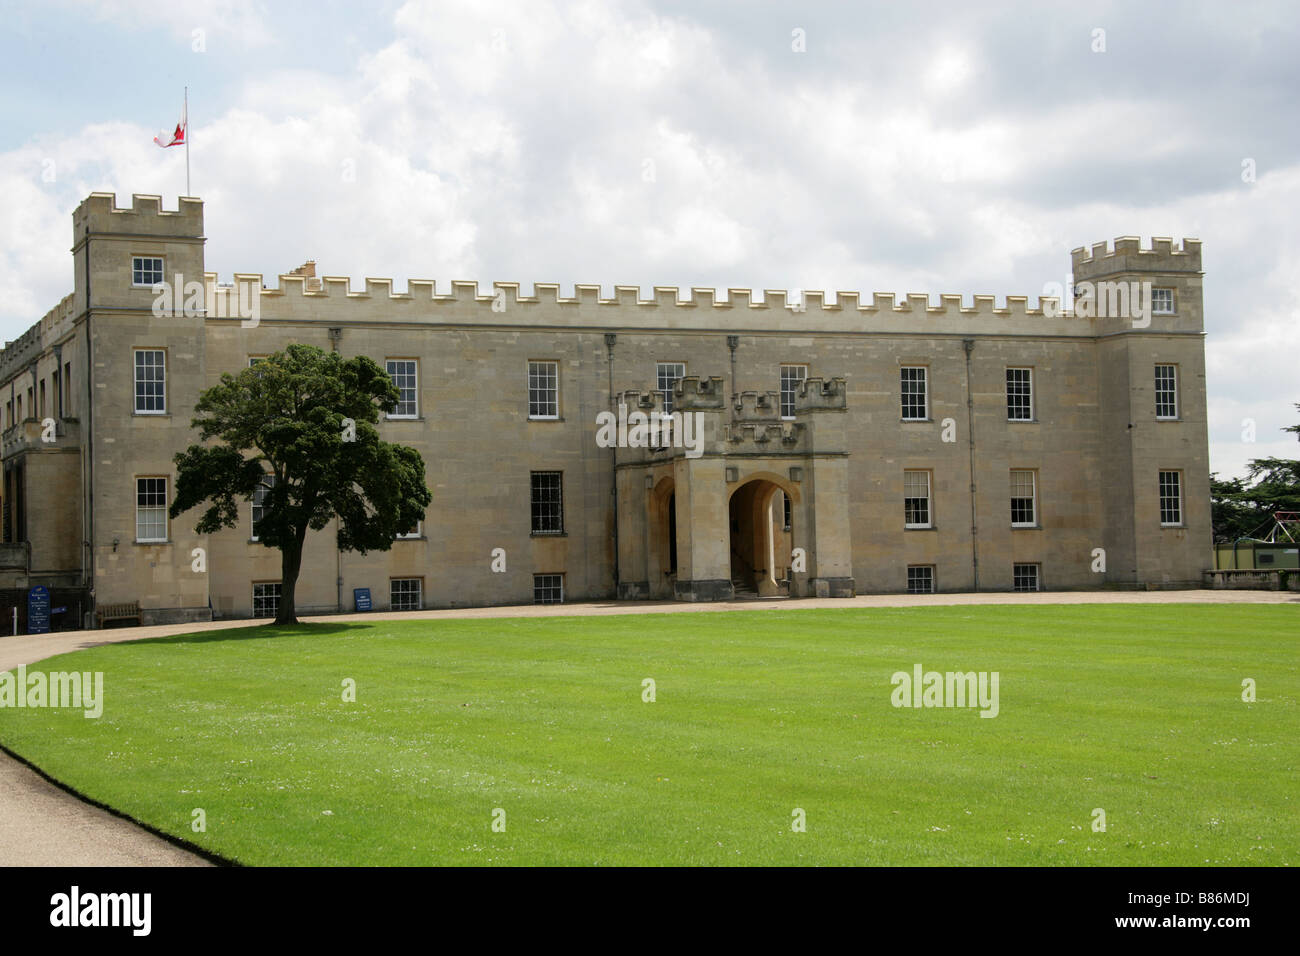 Syon House, Brentford, Middlesex, England, UK. Stock Photo